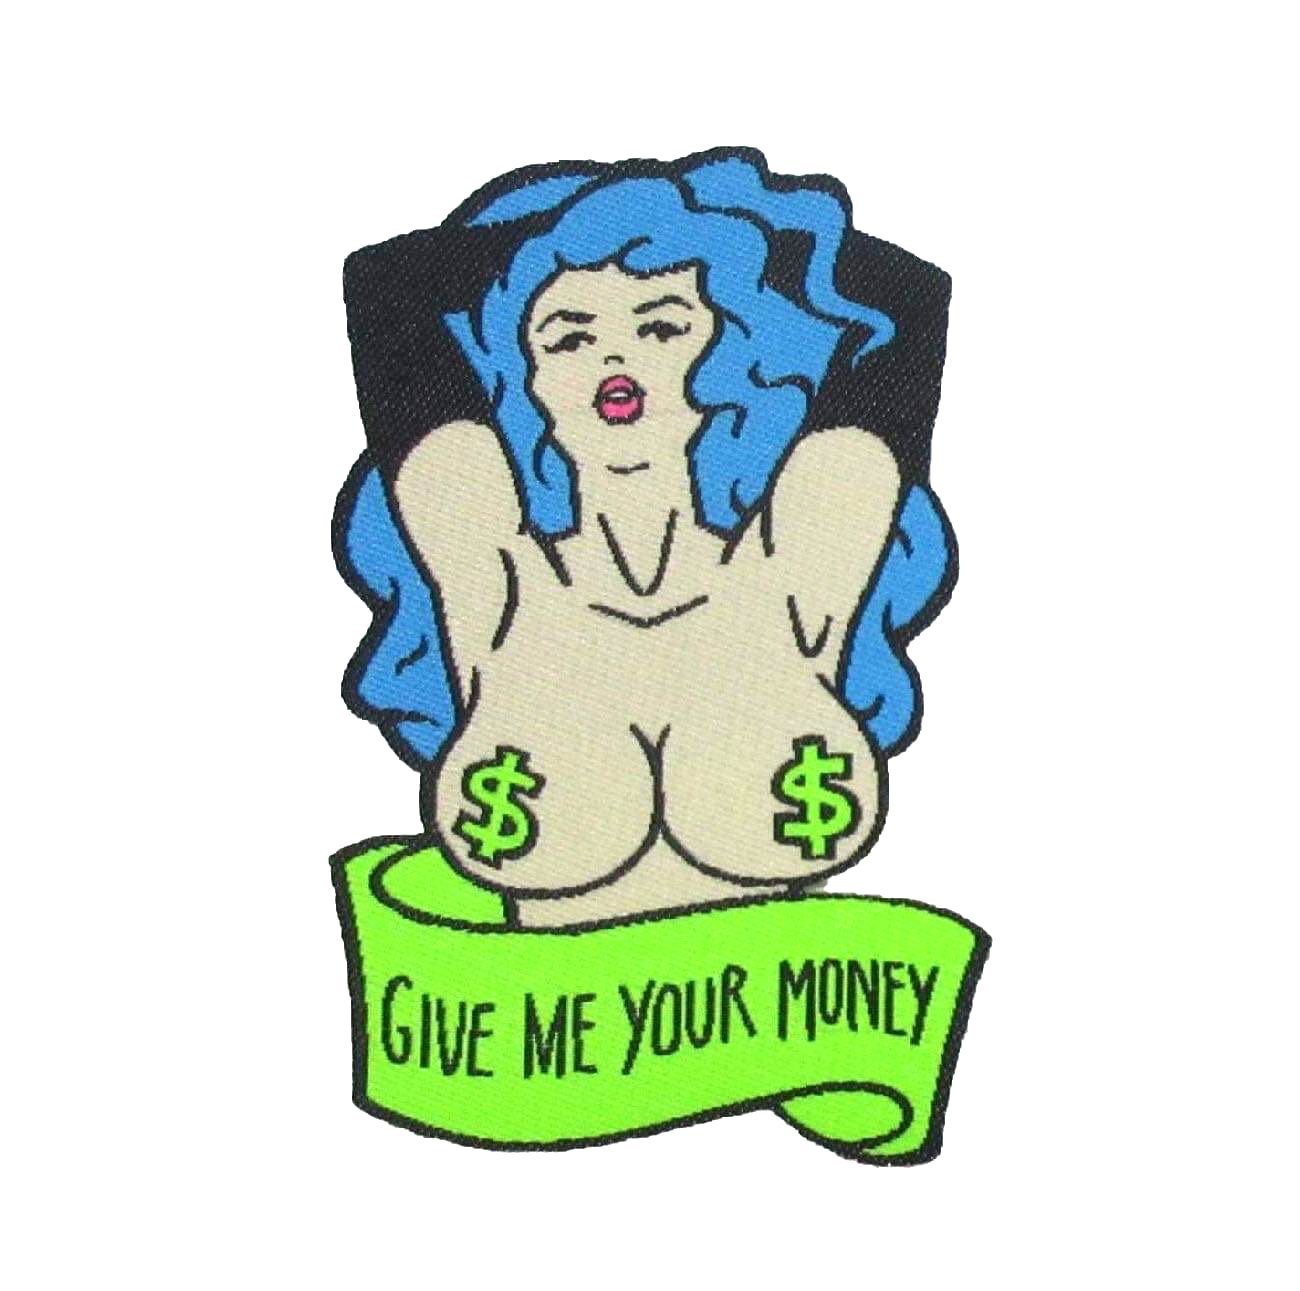 A bright woven patch featuring the bust of a topless, blue haired woman wearing green dollar sign pasties. Below her is a banner that says "GIVE ME YOUR MONEY".